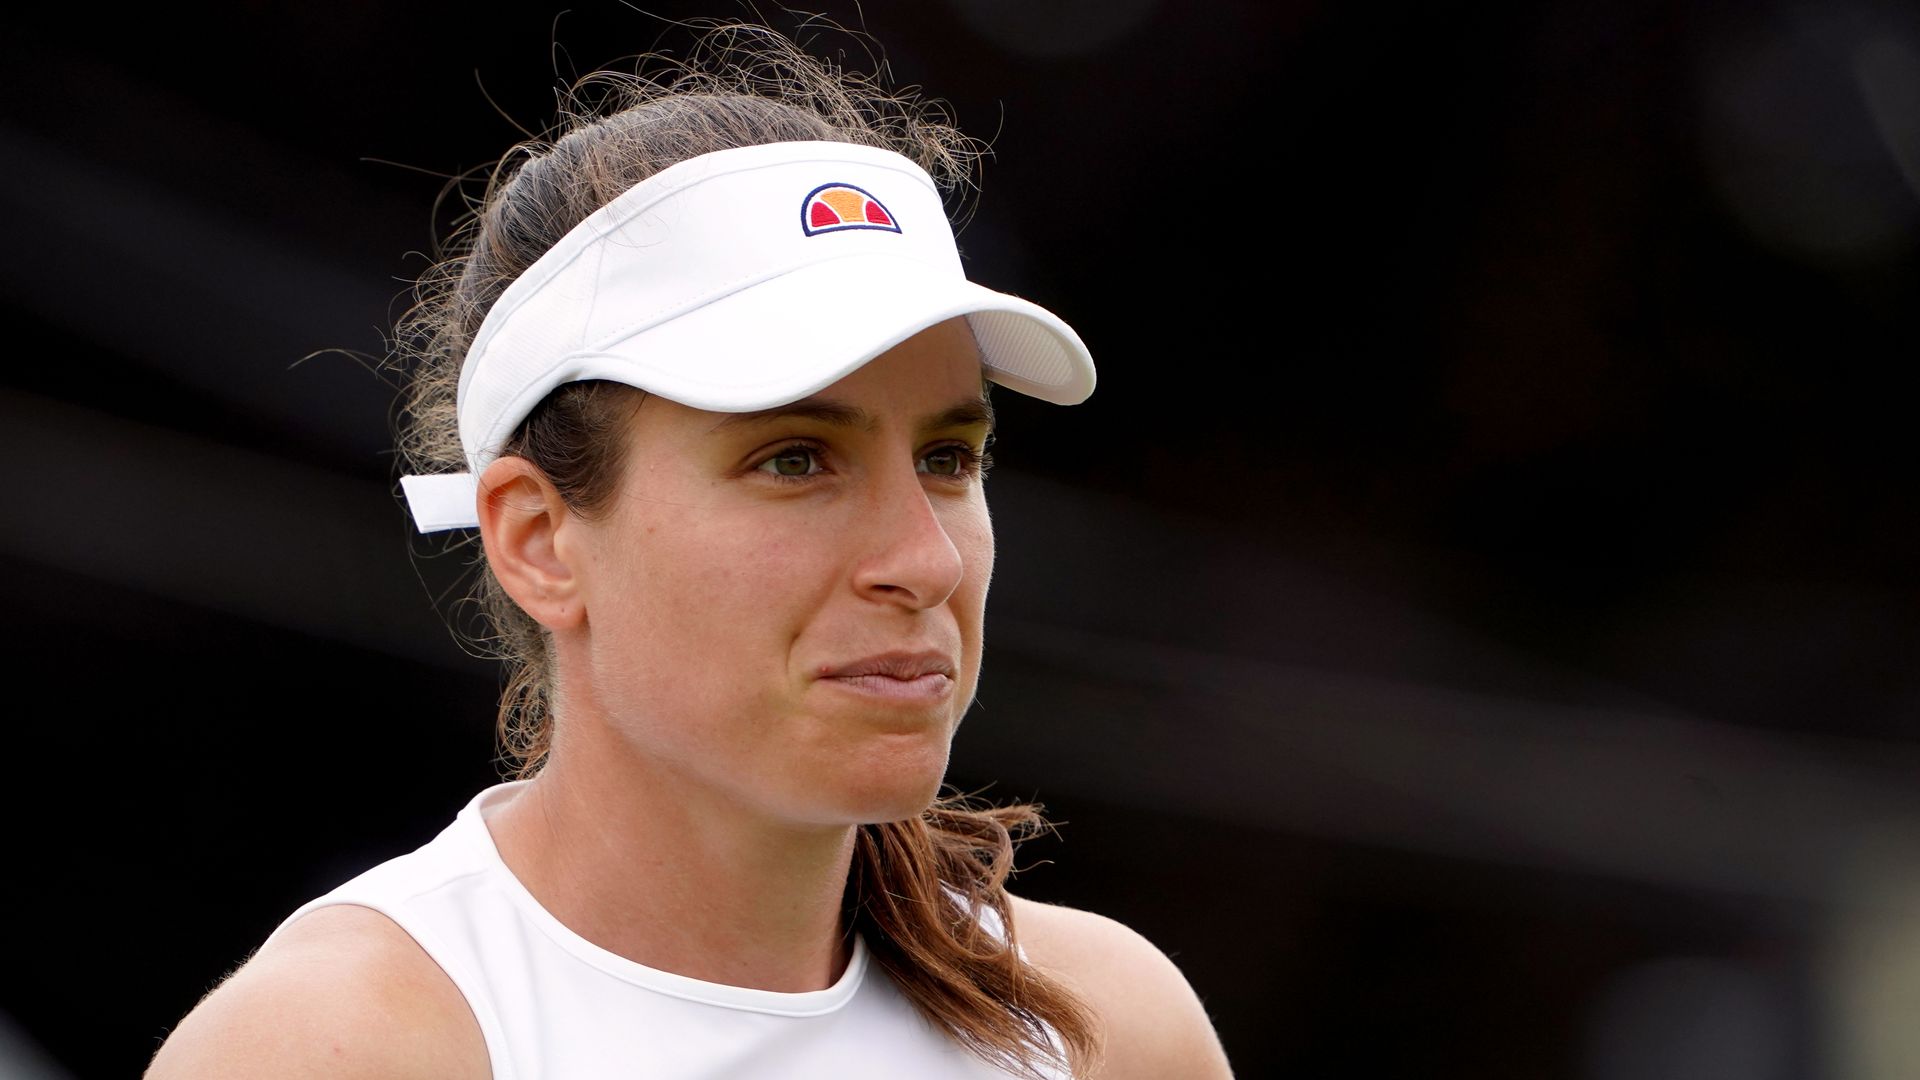 Konta withdraws from Olympics after positive Covid-19 test